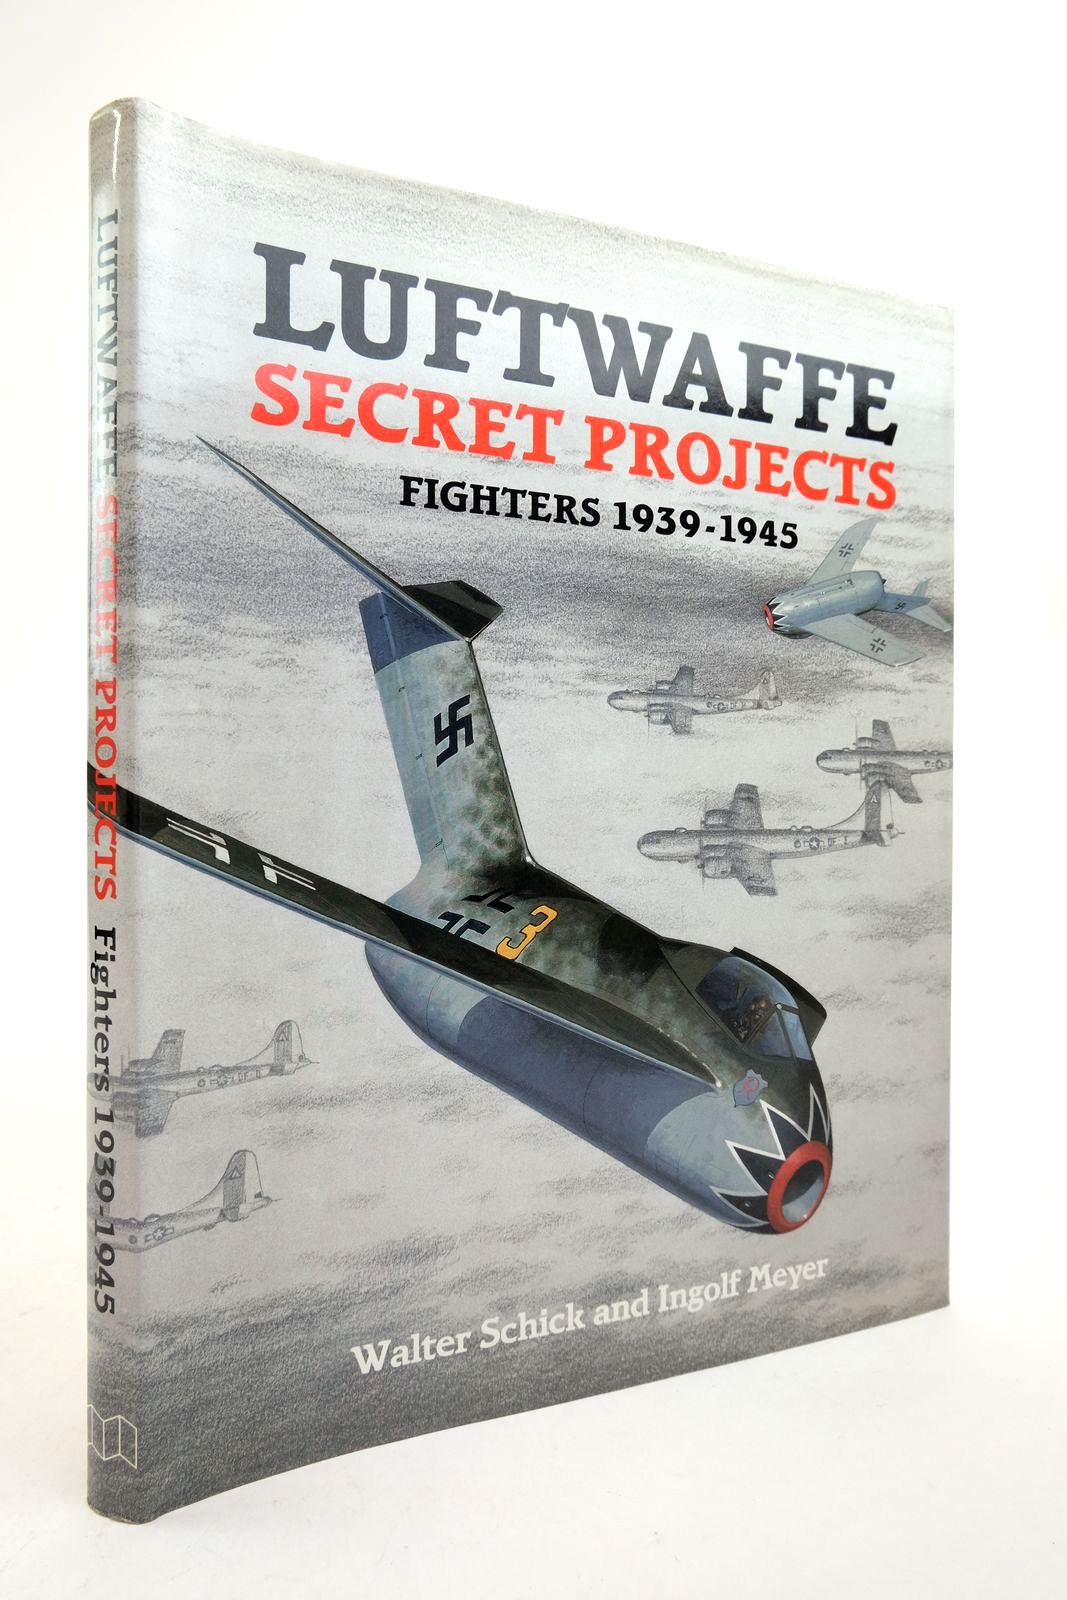 Photo of LUFTWAFFE SECRET PROJECTS FIGHTERS 1939-1945 written by Schick, Walter Meyer, Ingolf published by Midland Publishing (STOCK CODE: 2139376)  for sale by Stella & Rose's Books